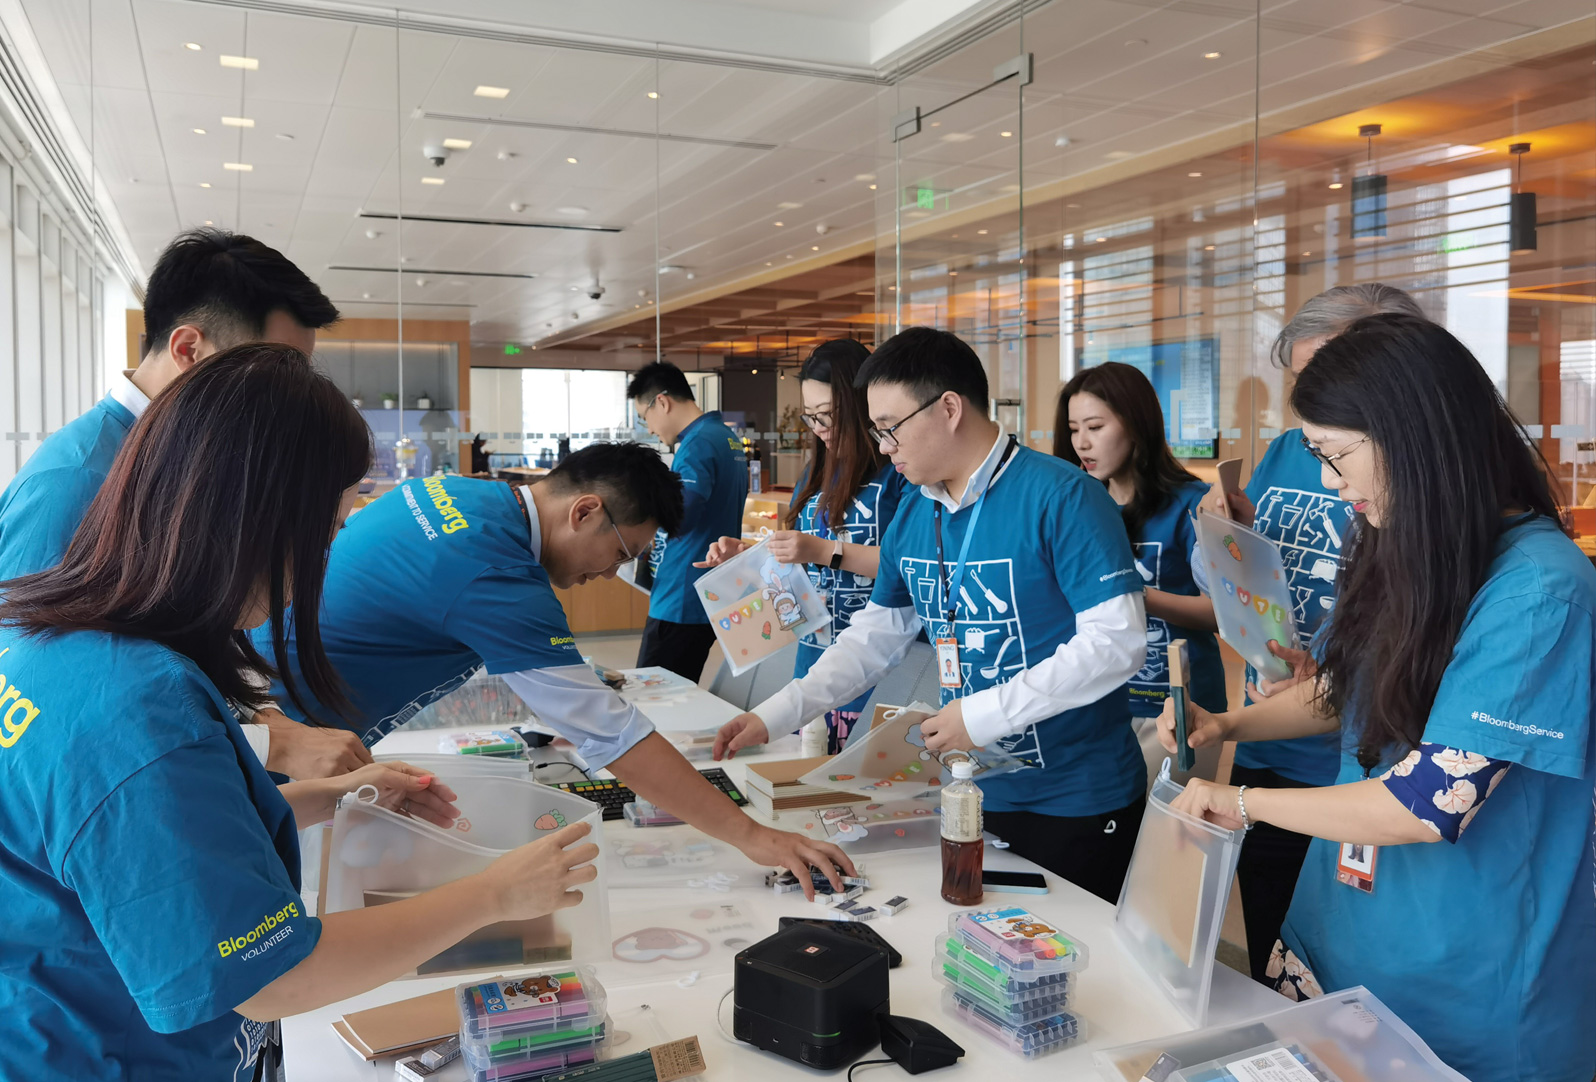 Bloomberg employees volunteer and give back to their communities across a wide range of projects, including preparing meals in Hong Kong